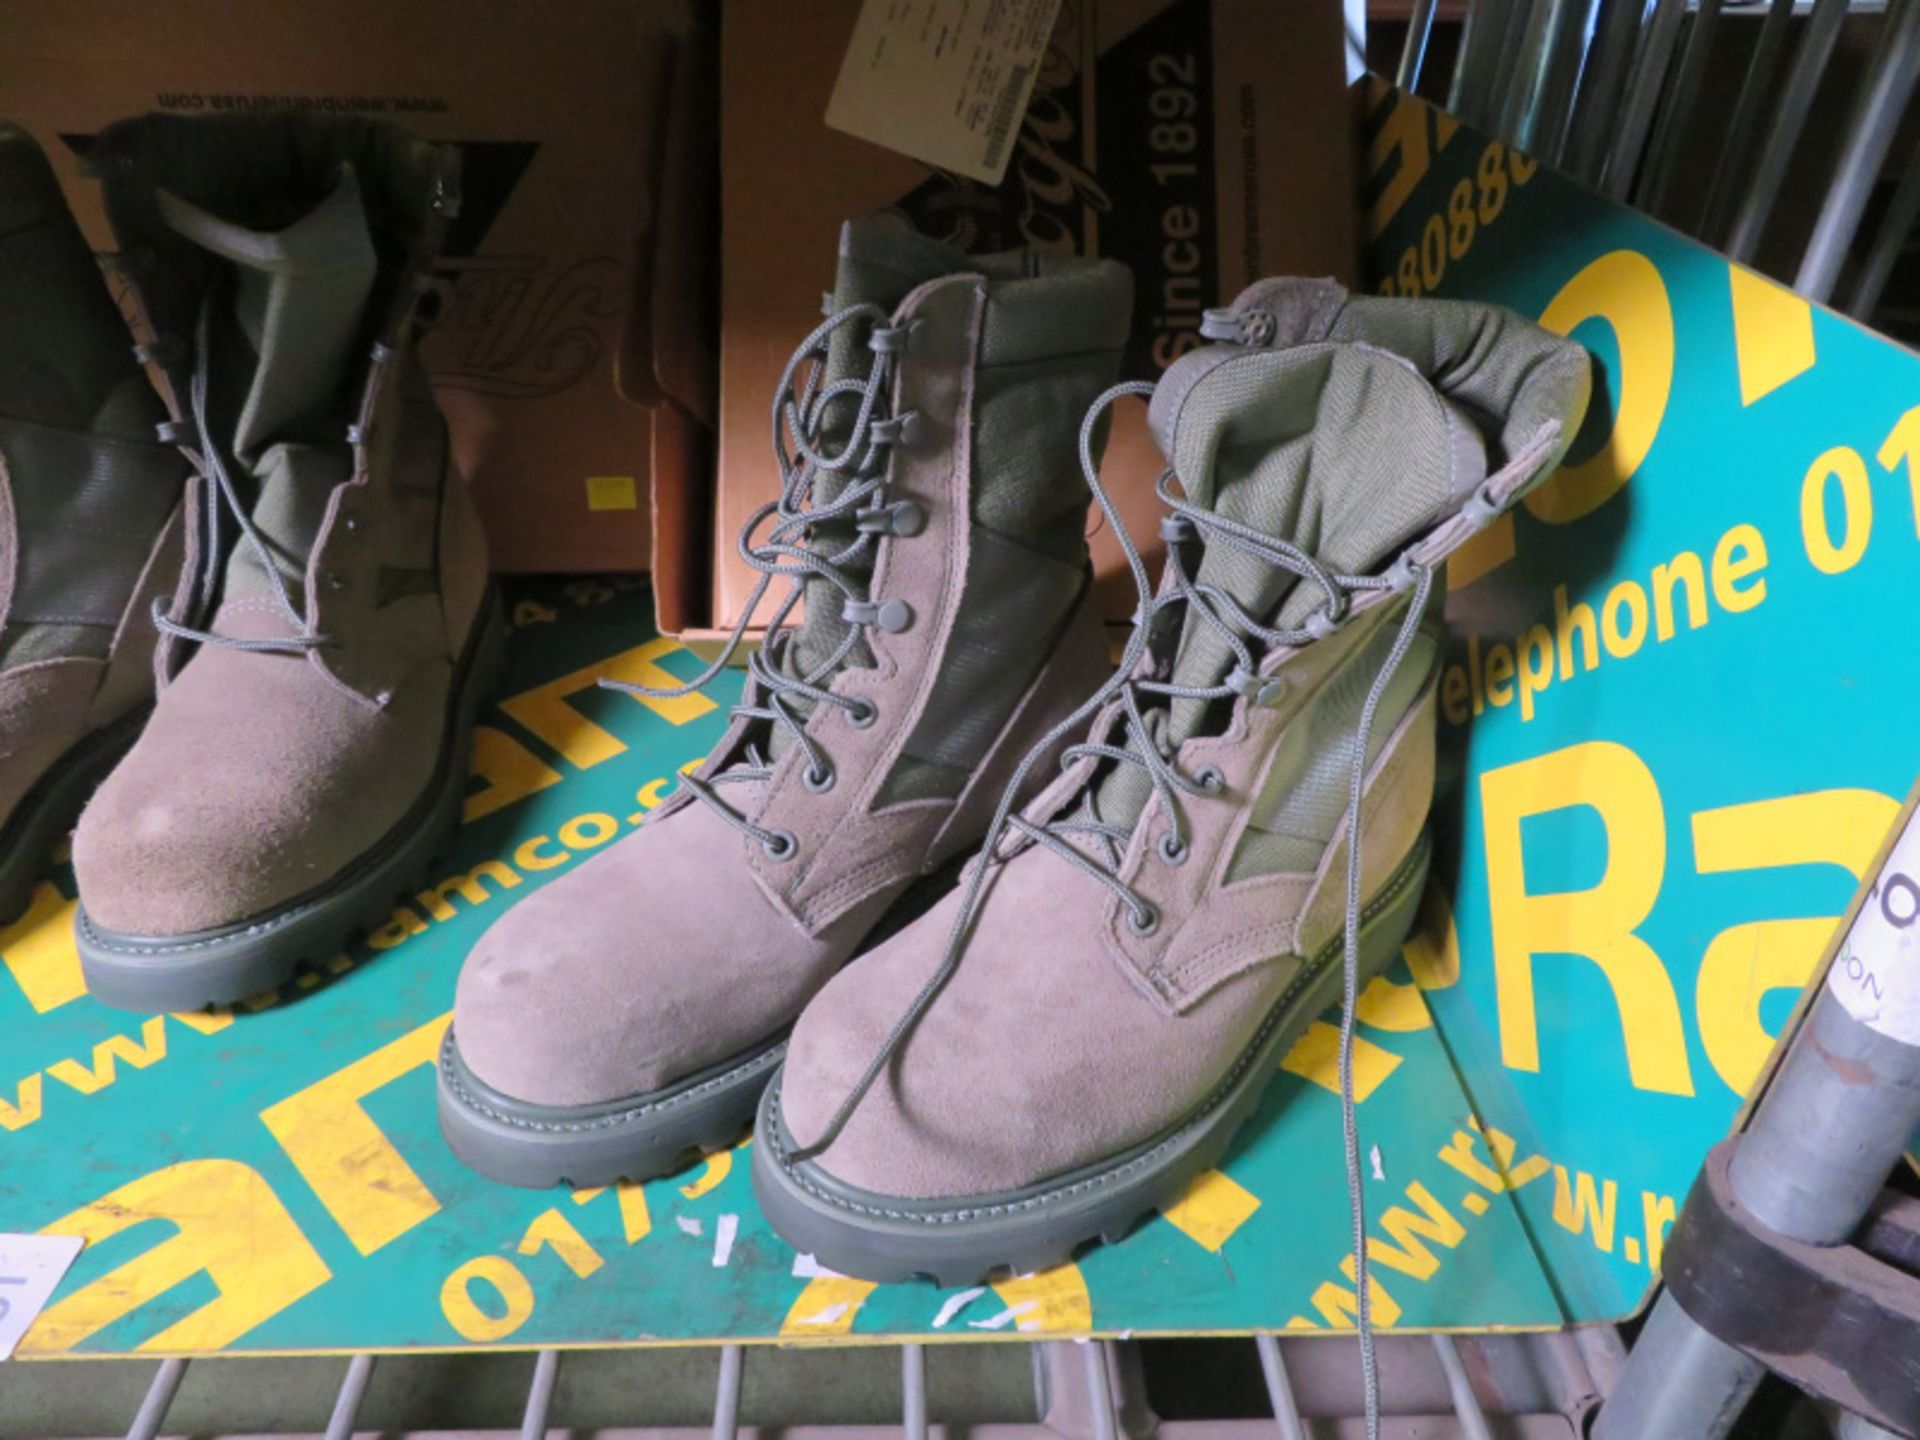 3x Pairs Hot Weather Boots (7 R - Sage x2 & 6 R - Sage) - Image 6 of 7